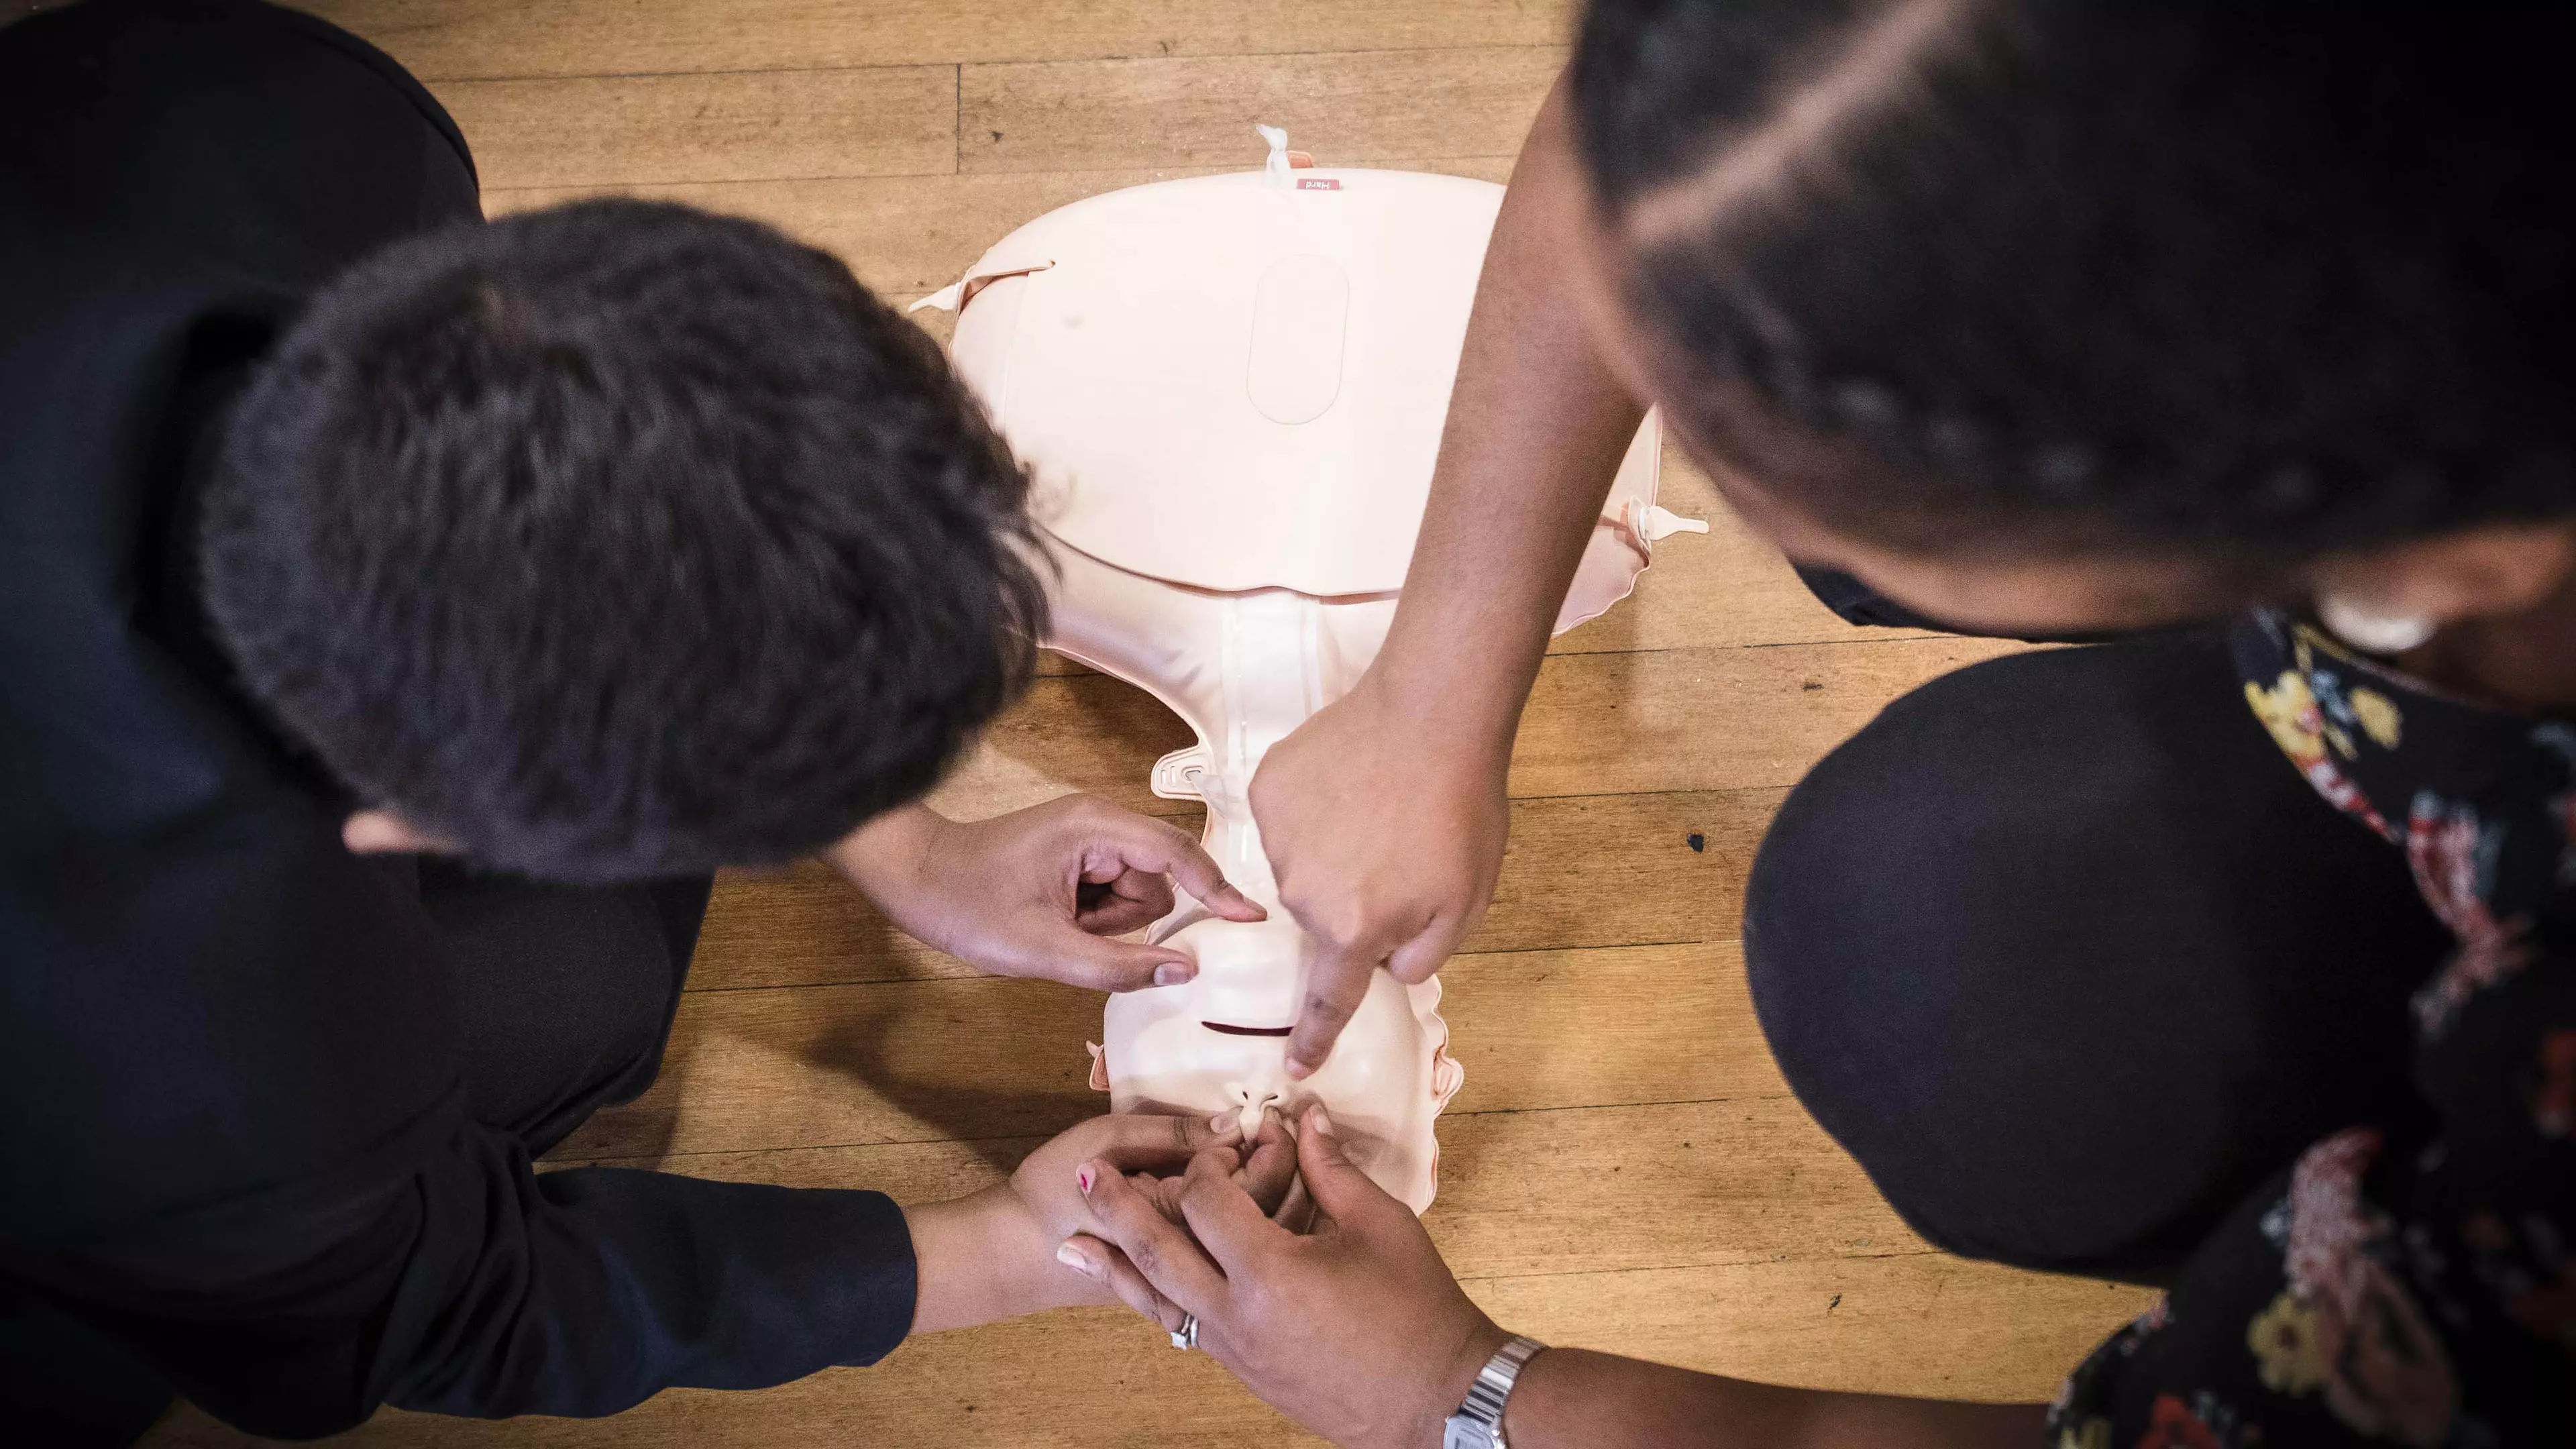 UK Children To Be Taught CPR And Basic First Aid Skills In Schools 